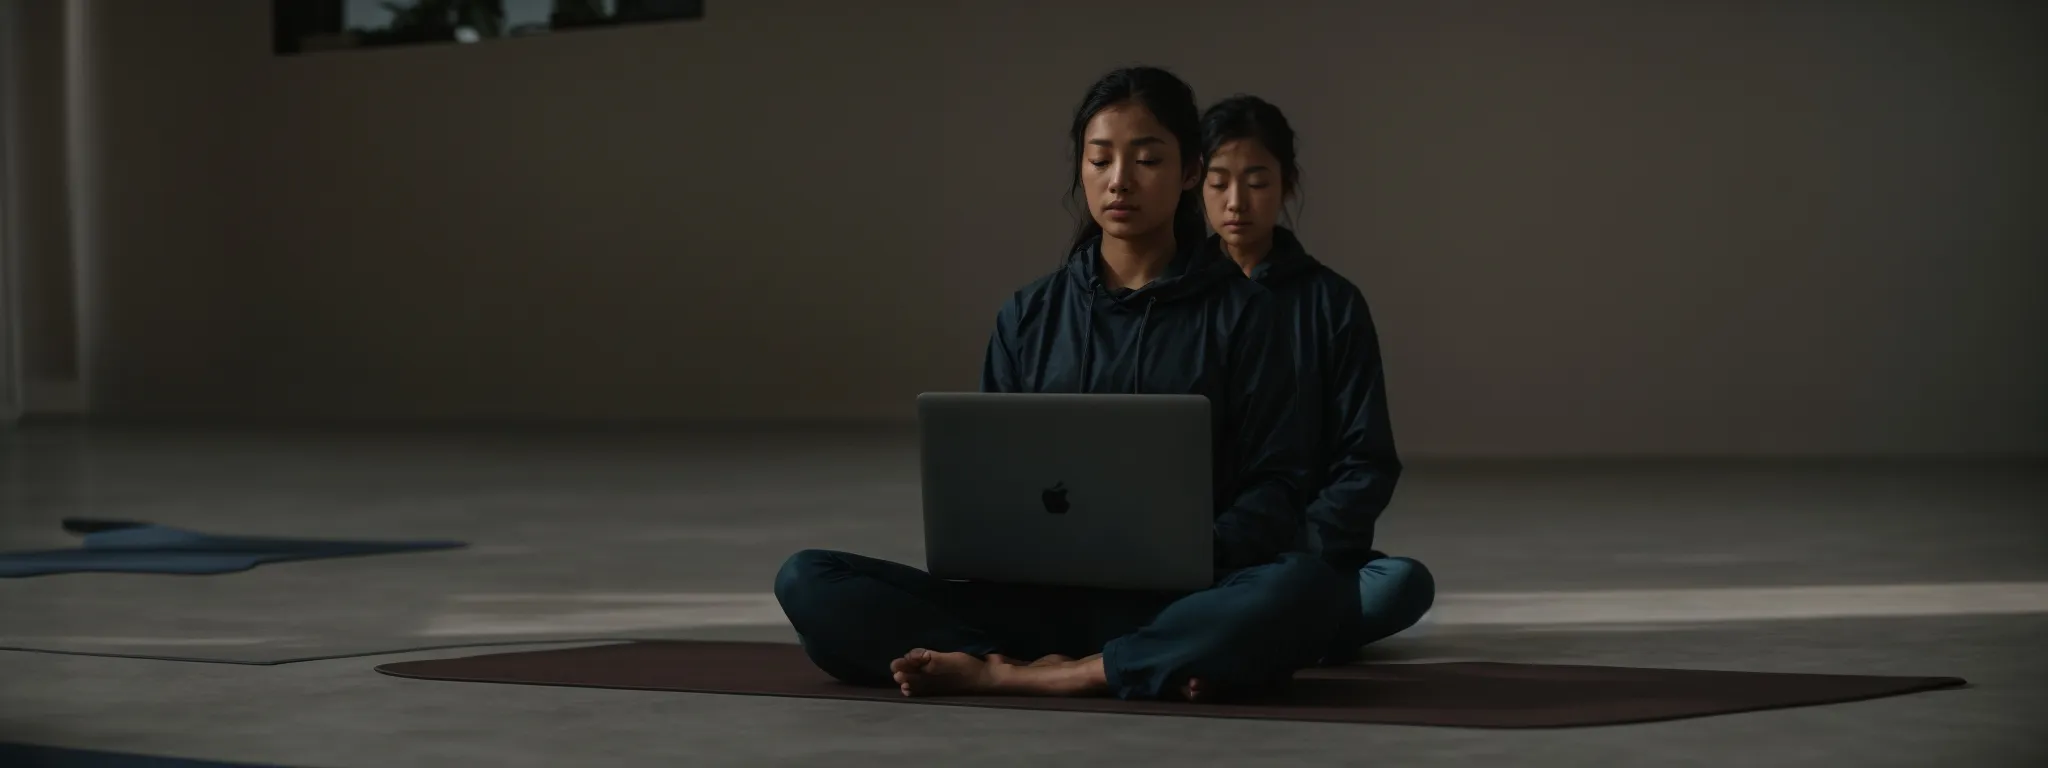 a yoga instructor sitting cross-legged with a laptop on a mat, immersed in research.